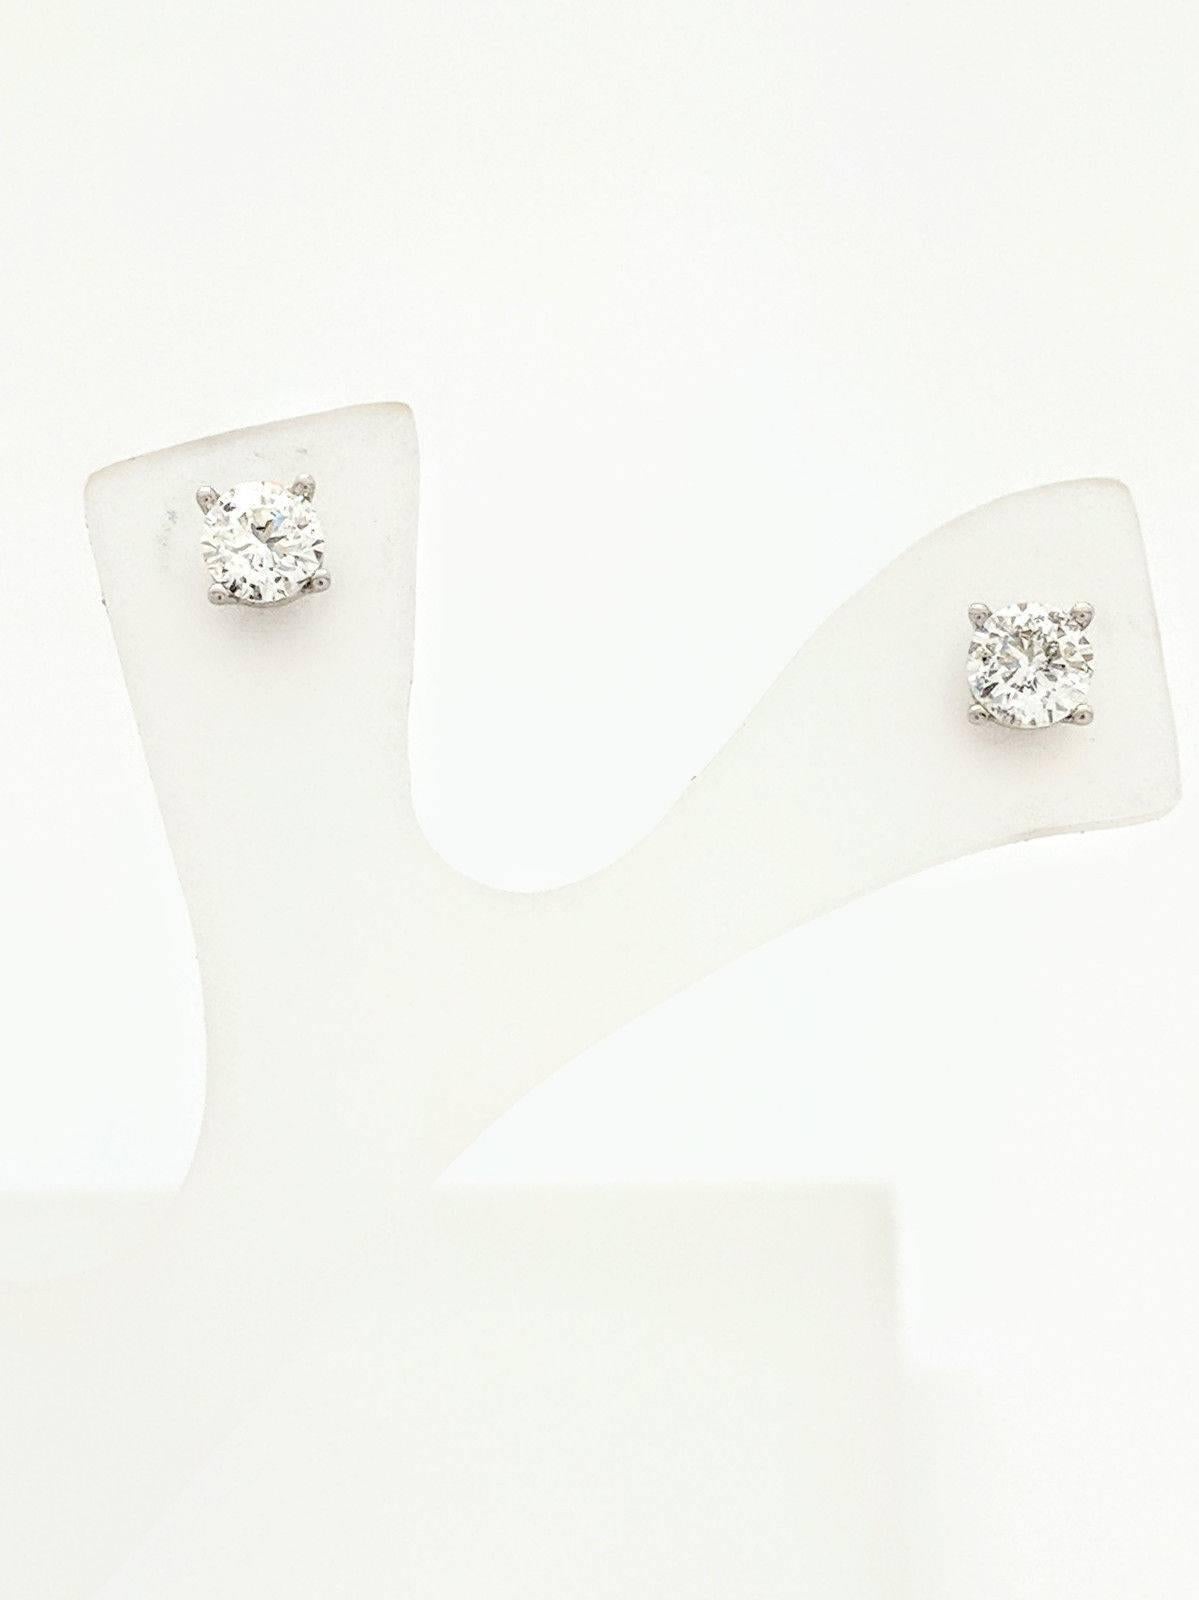 .78ct Round Brilliant Cut Diamond Stud Earrings in 18K White Gold GSI CERTIFIED 

You are viewing a Beautiful Pair of Diamond Stud Earrings. These diamonds are certified by GSI (Gemological Science International). These diamonds are beautifully